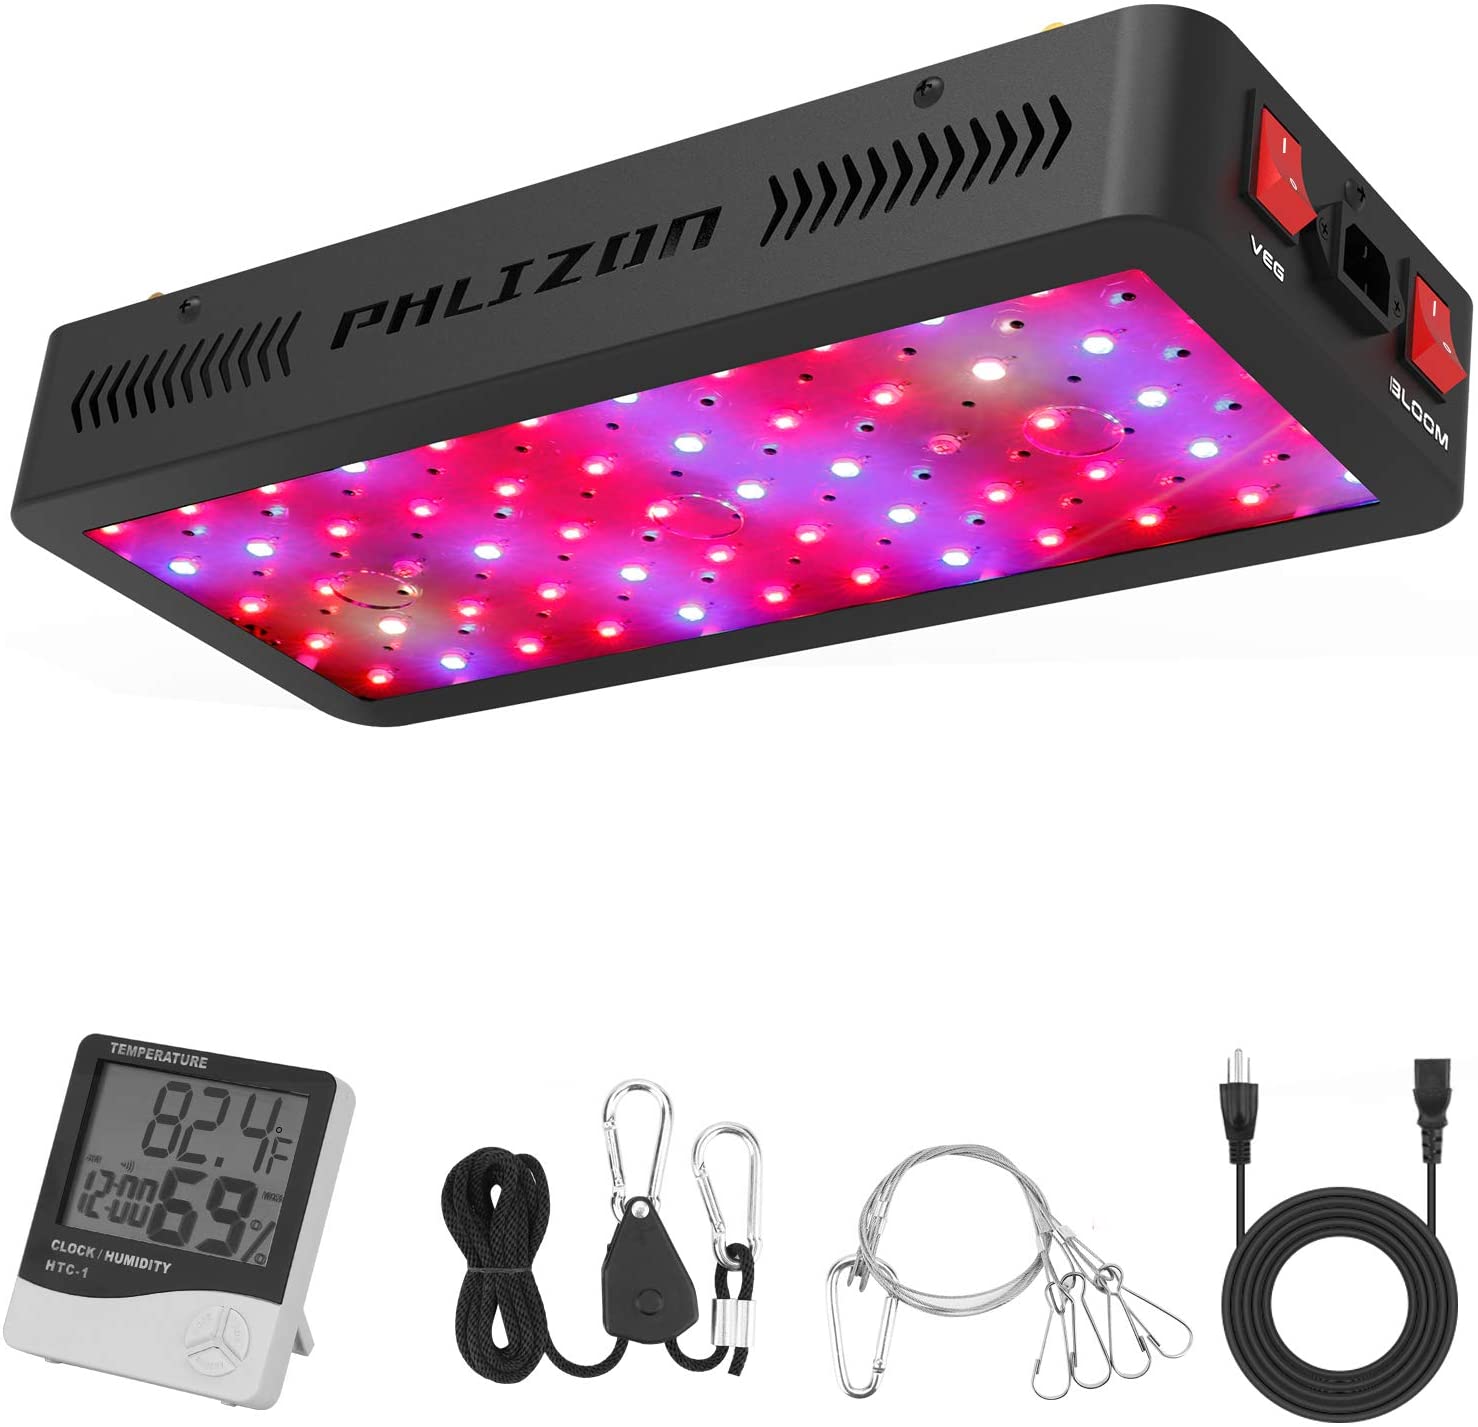 Review of Phlizon 600W LED Plant Grow Light,with Thermometer Humidity Monitor